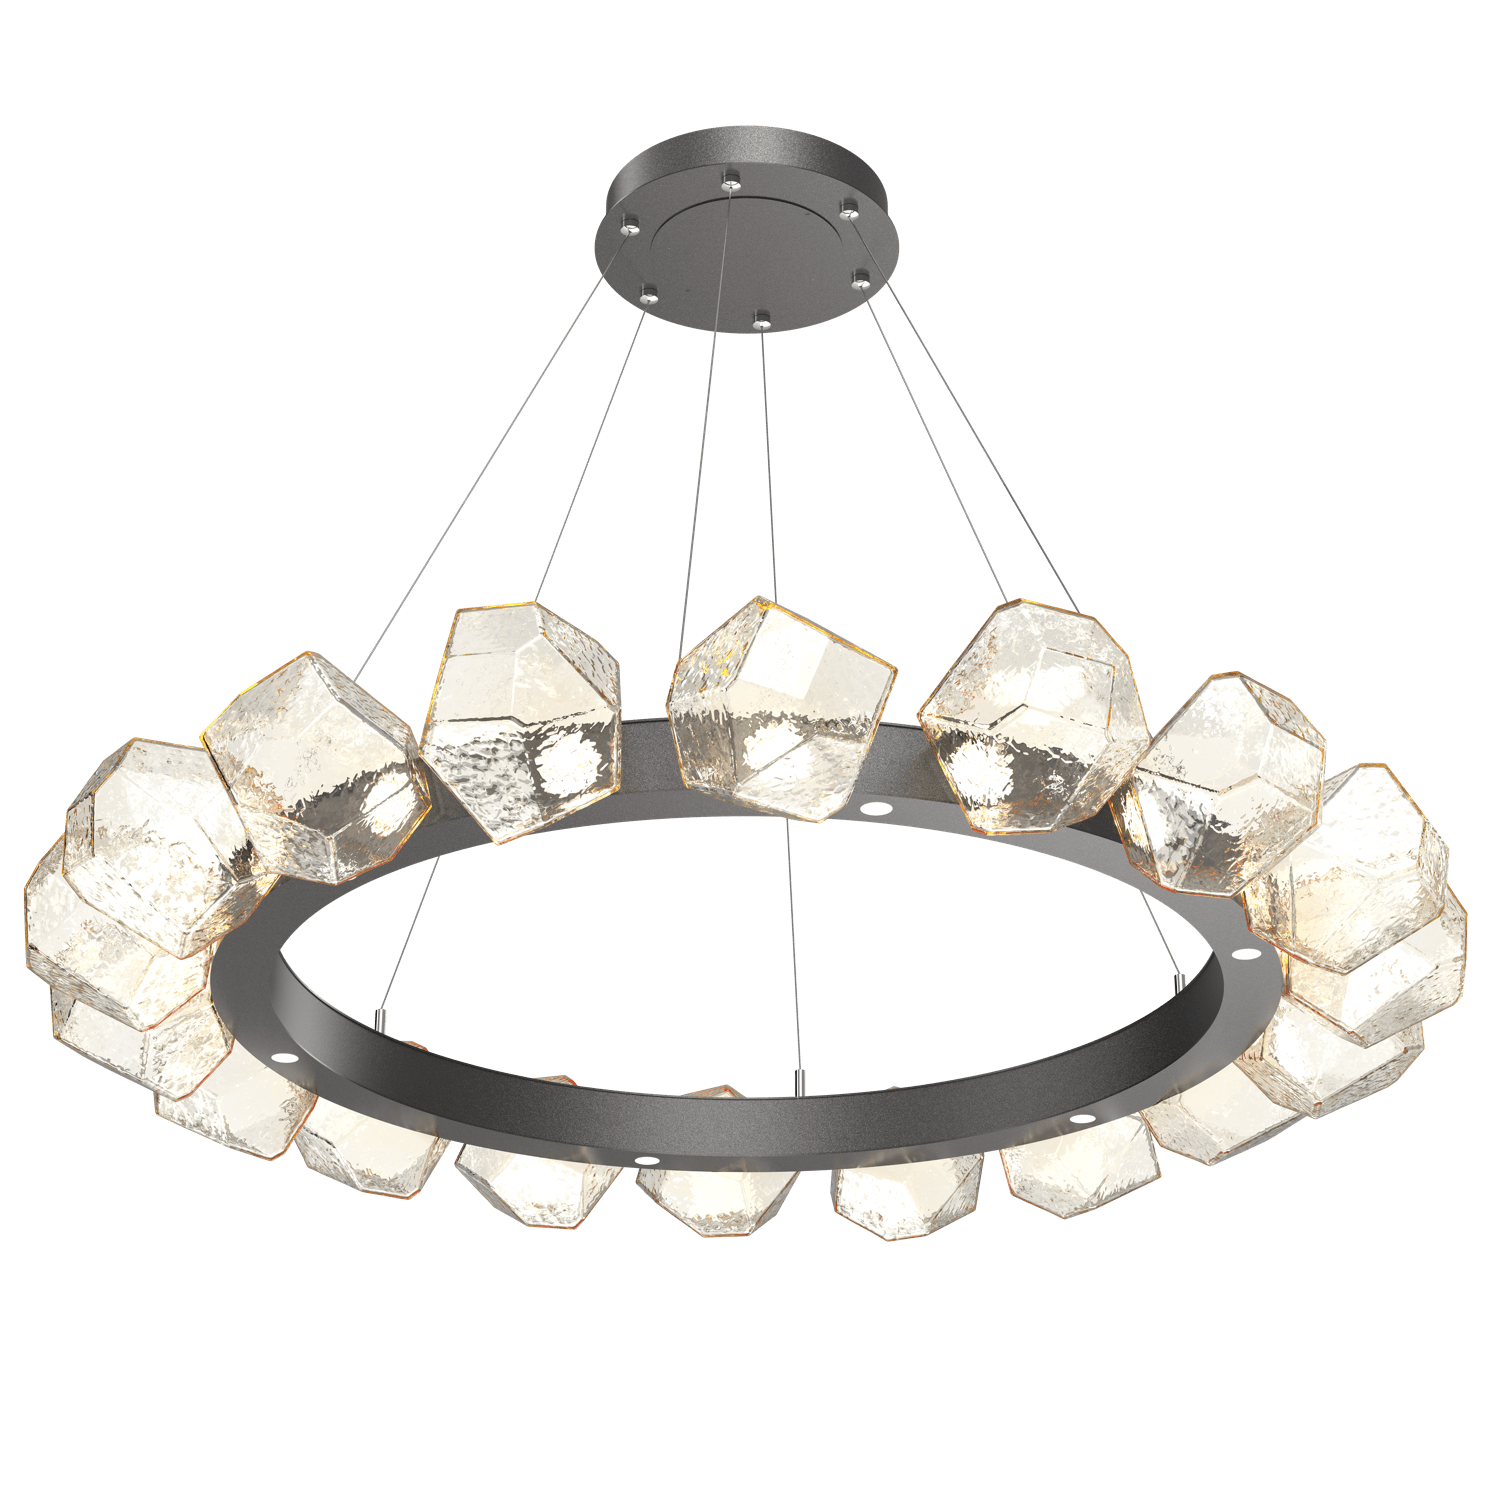 CHB0039-48-GP-A-Hammerton-Studio-Gem-48-inch-radial-ring-chandelier-with-graphite-finish-and-amber-blown-glass-shades-and-LED-lamping